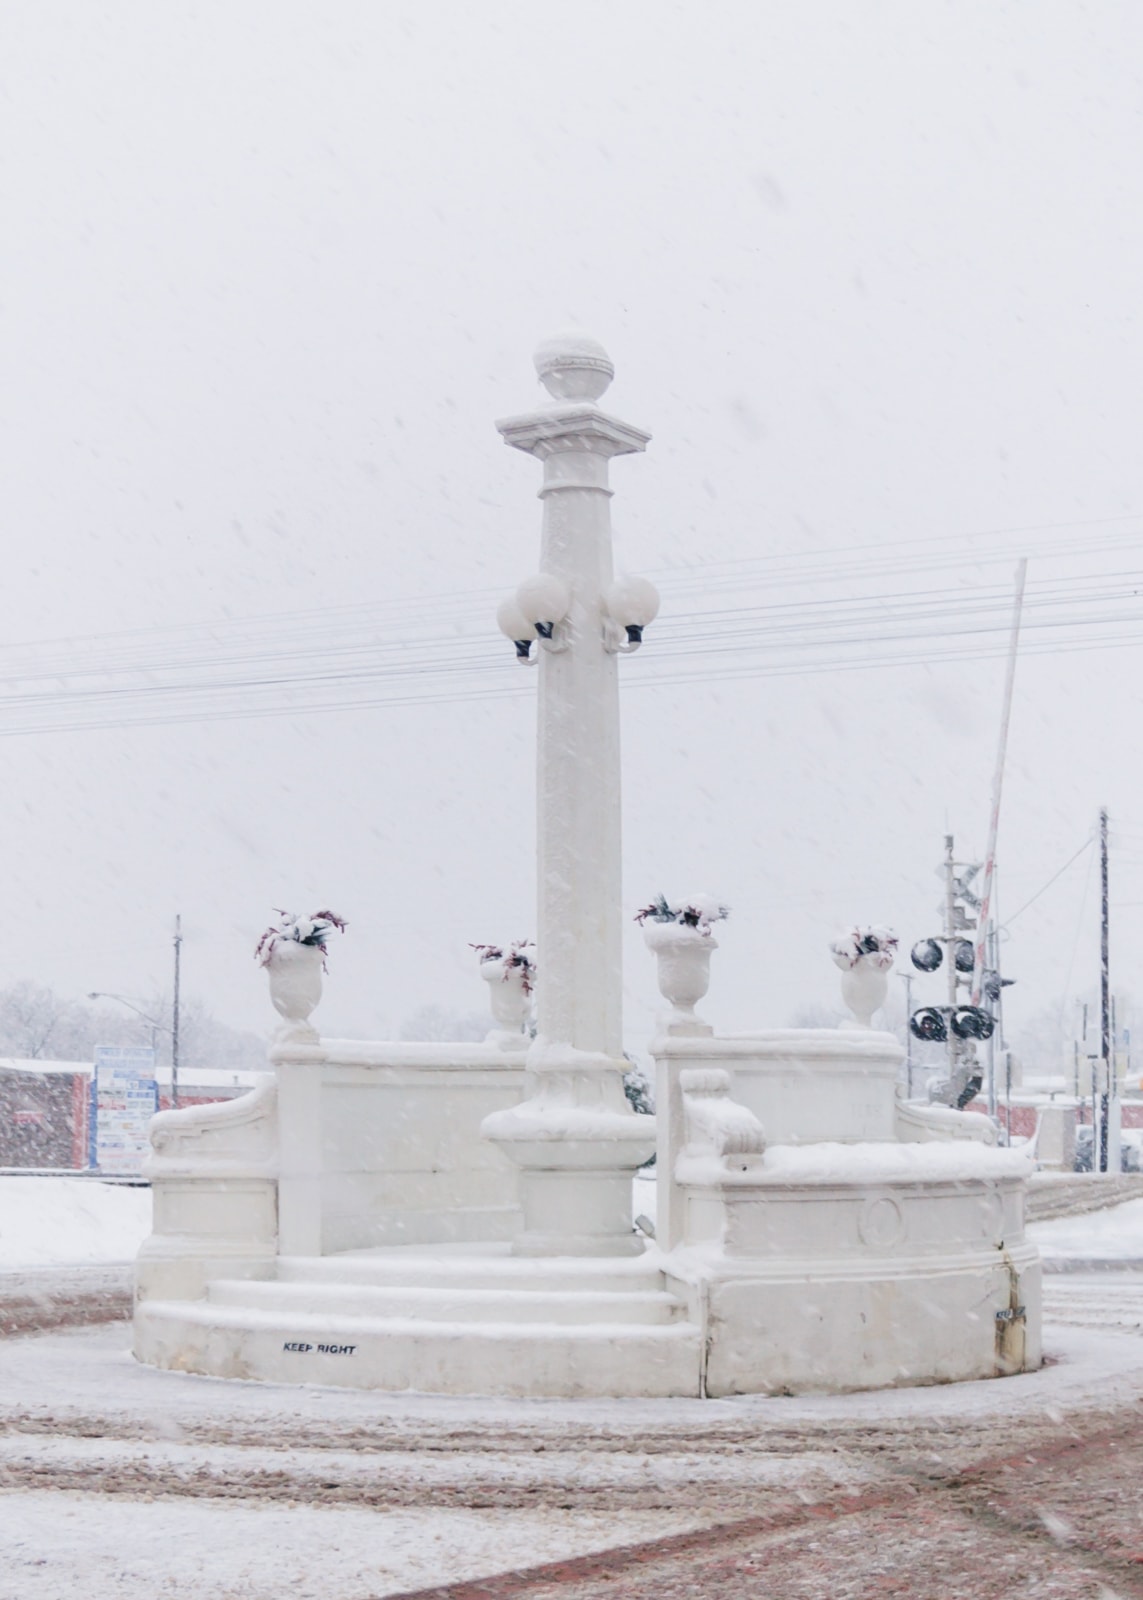 Rose monument covers with snow from the 2010 East Texas snowstorm